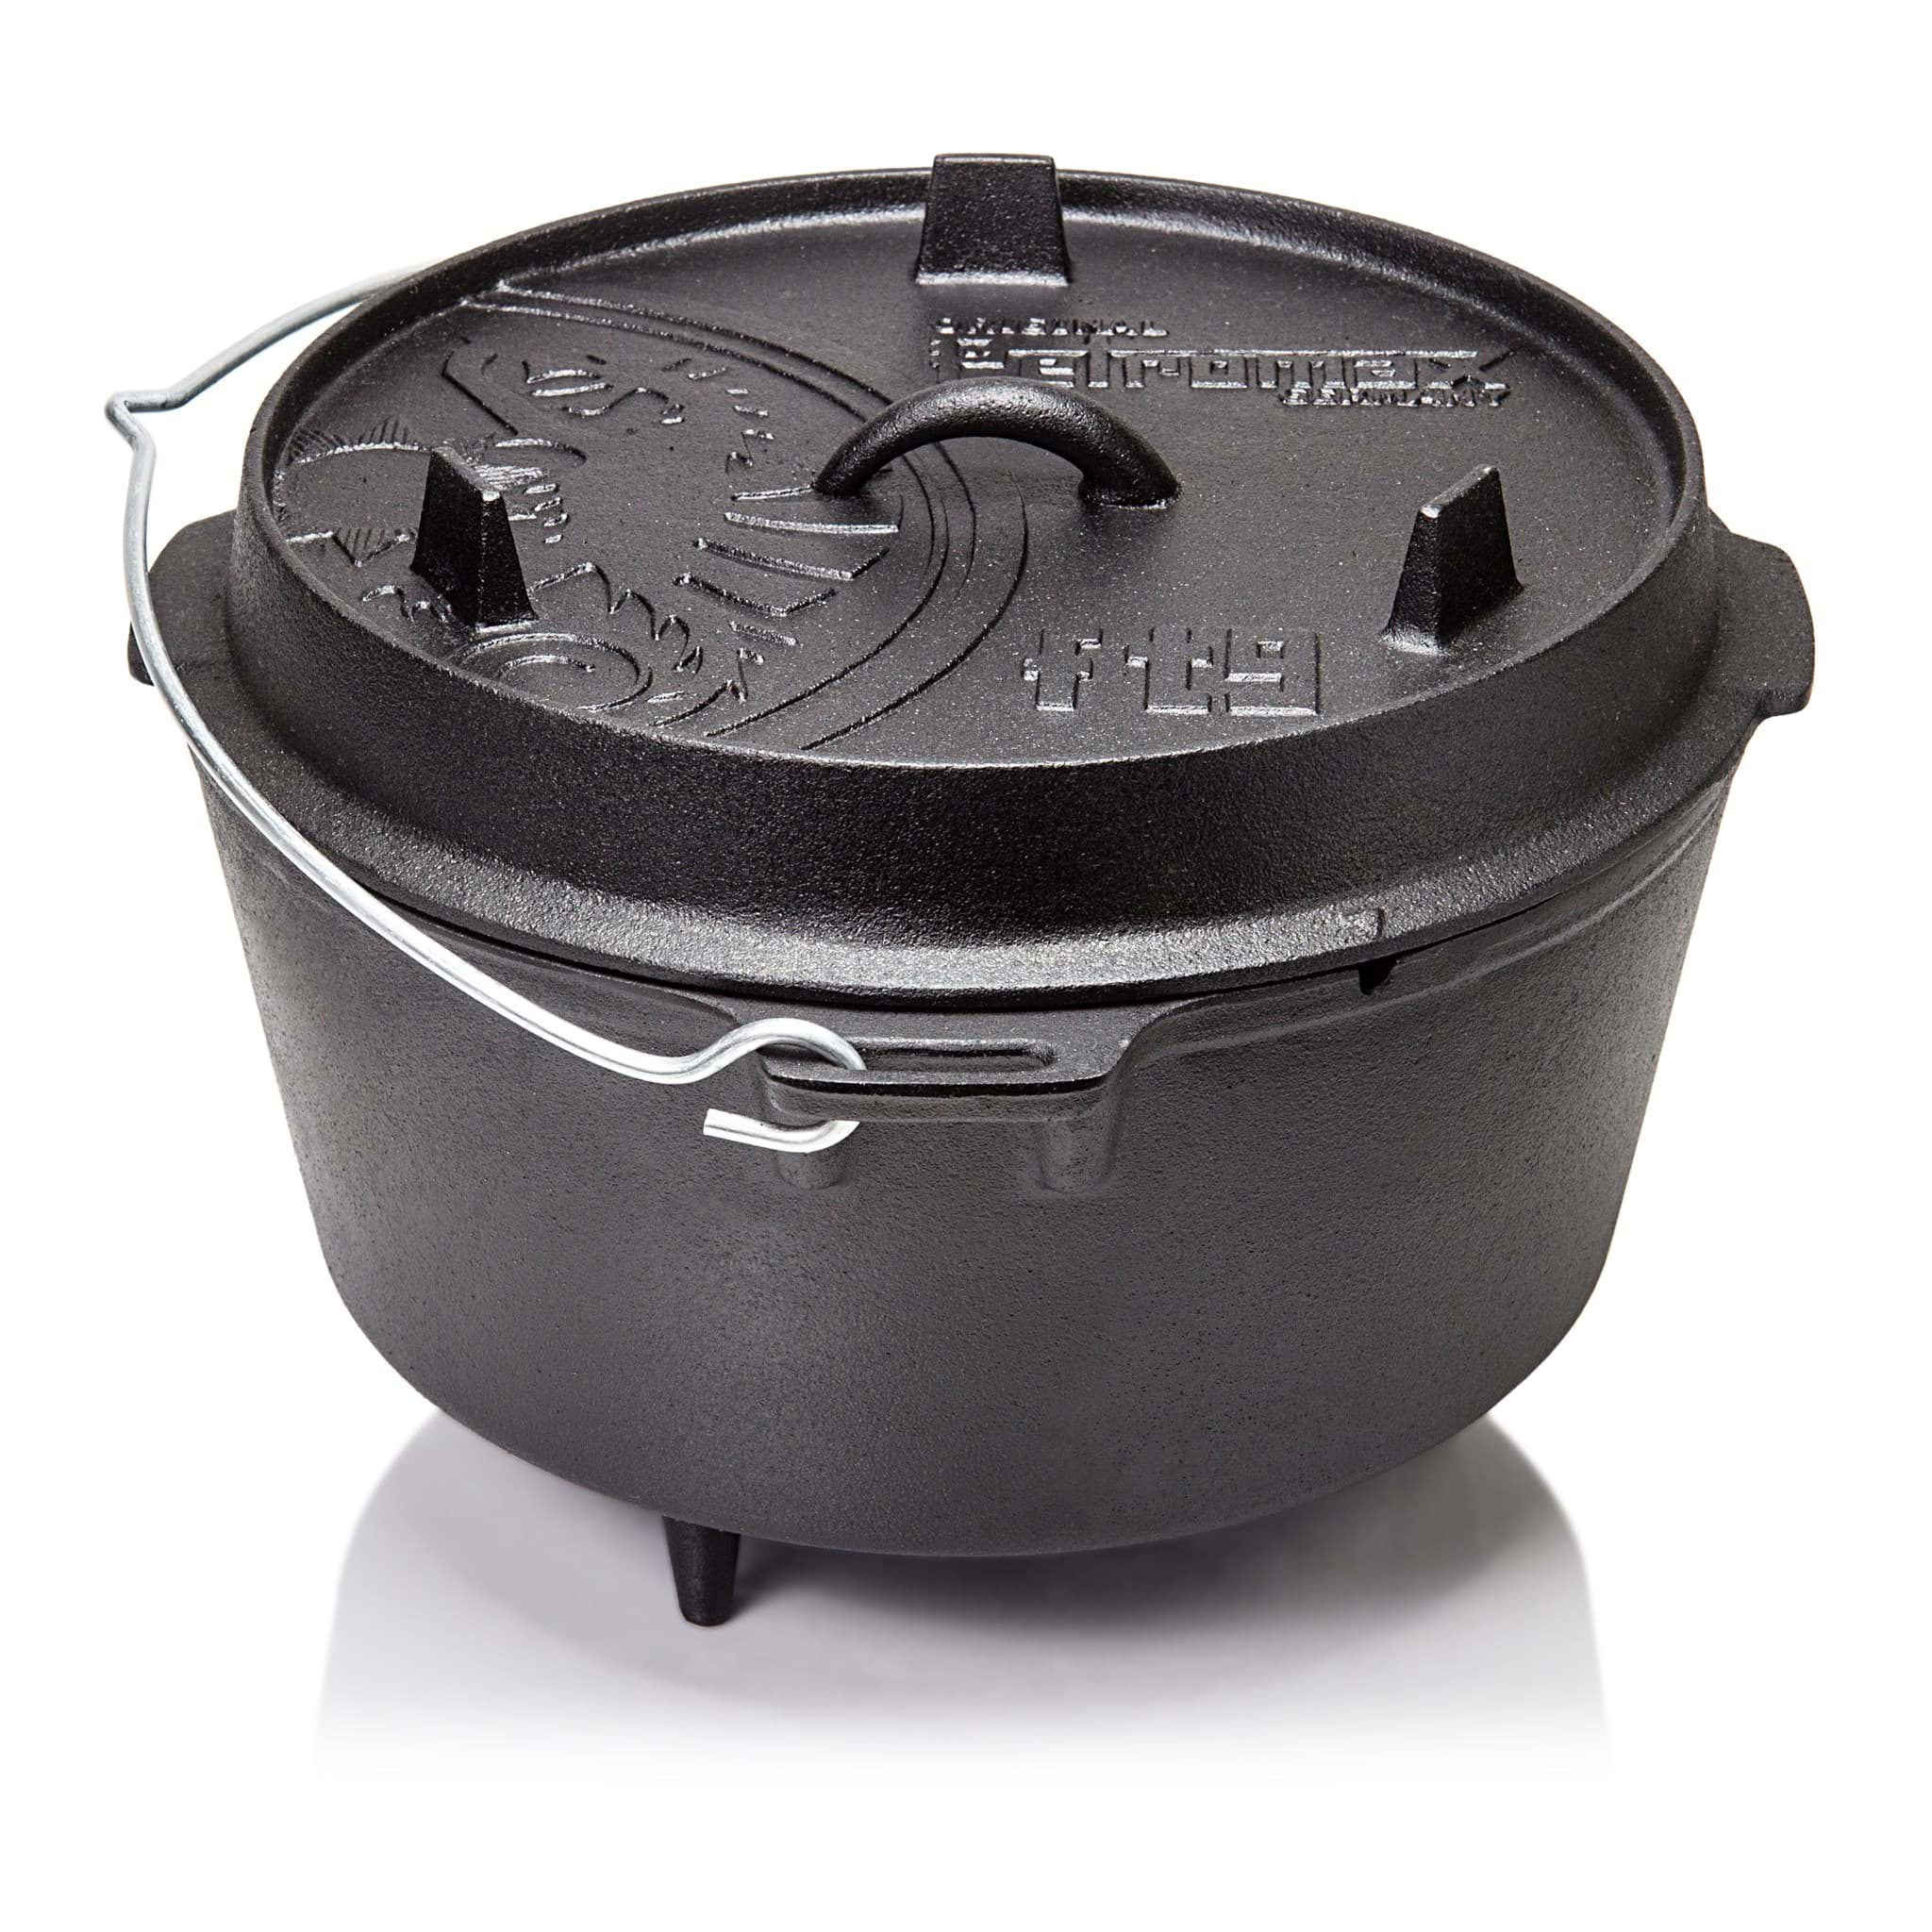 Picture of Petromax - Dutch Oven FT18 16.1 Liter (with Legs)